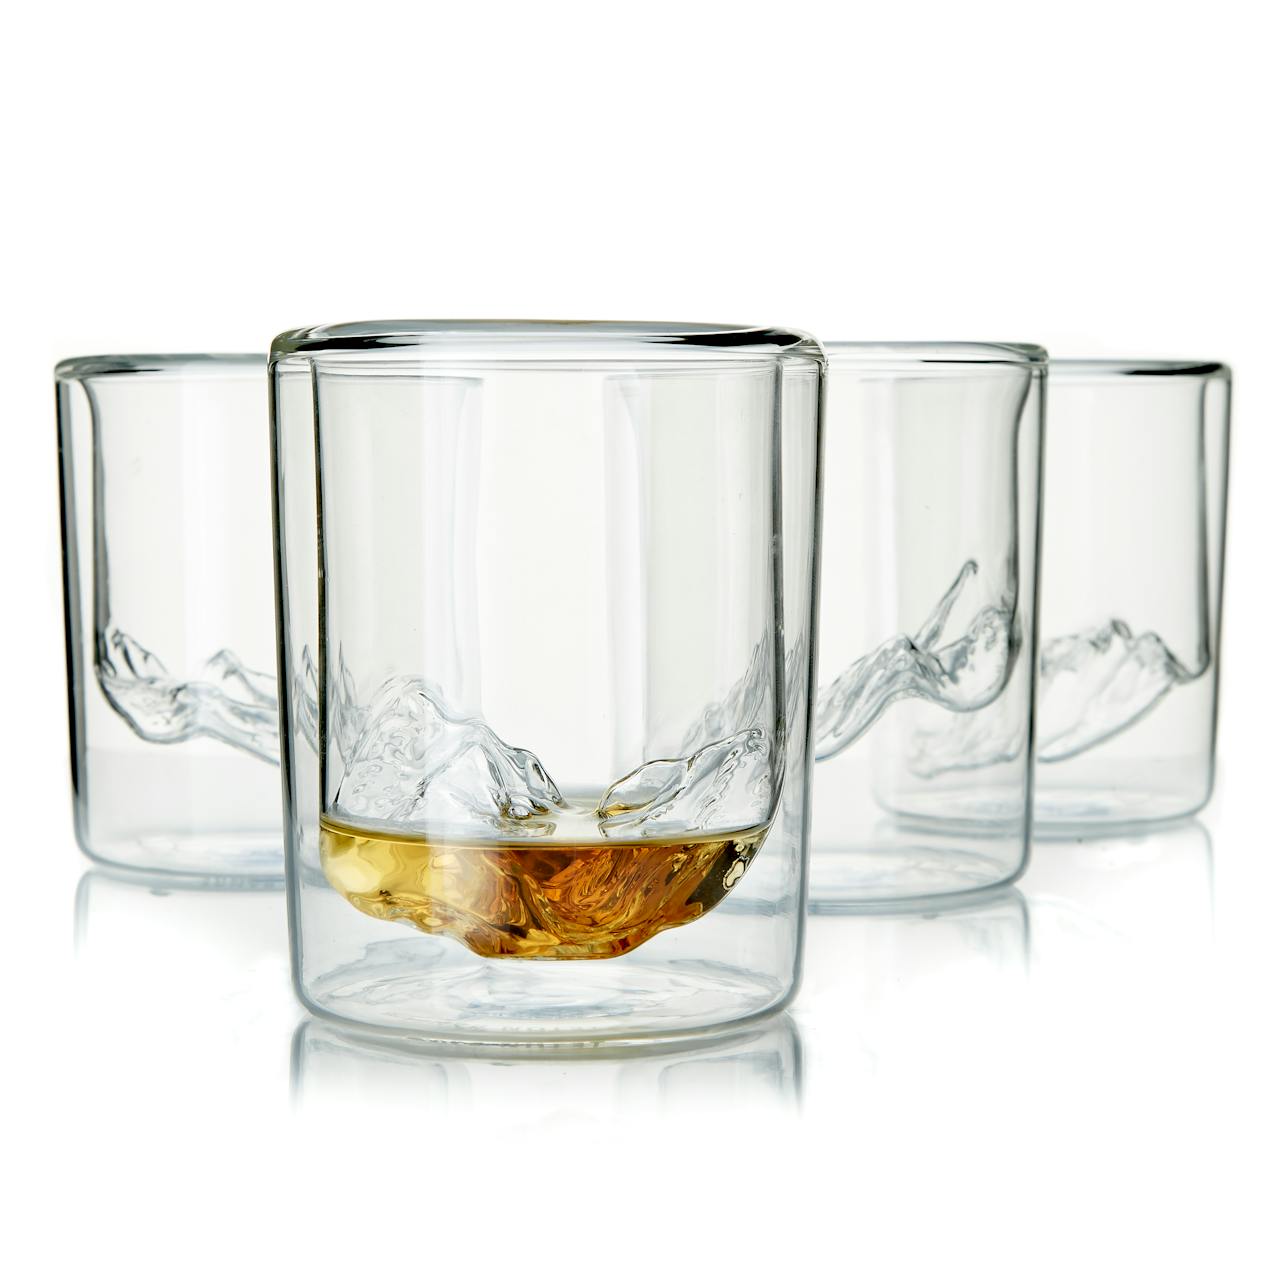 Whiskey Glasses Set of 2, Premium Hand Blown Lead-Free Double Wall Bar Clear